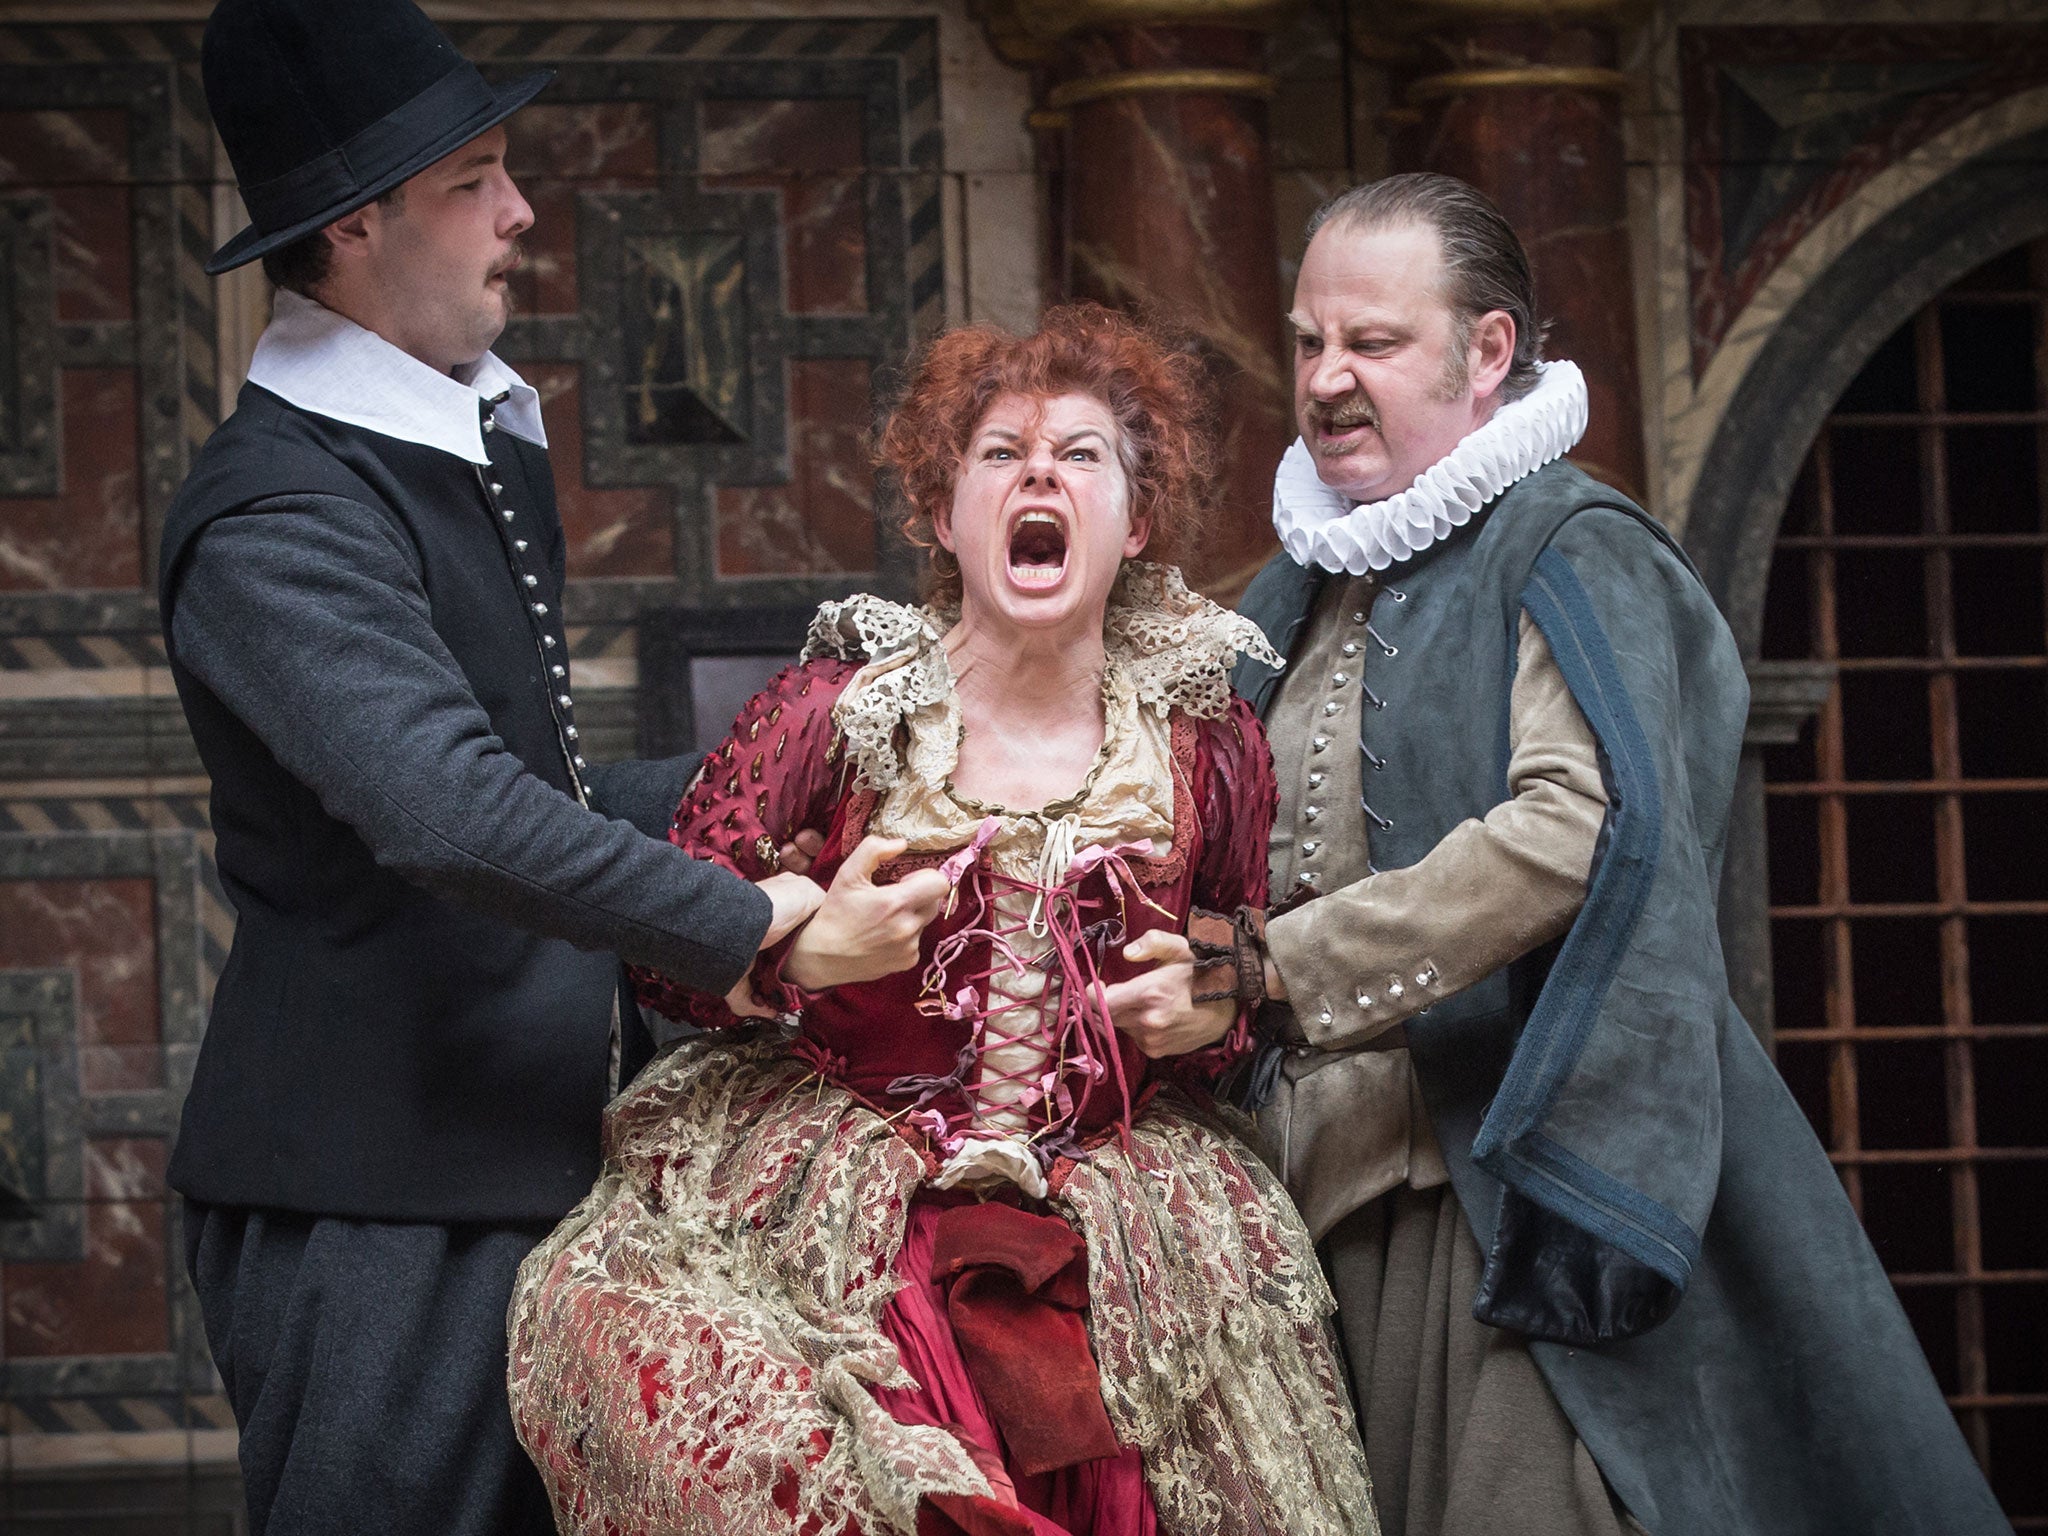 Dominic Dromgoole’s ‘Measure for Measure’ at Shakespeare’s Globe in 2015